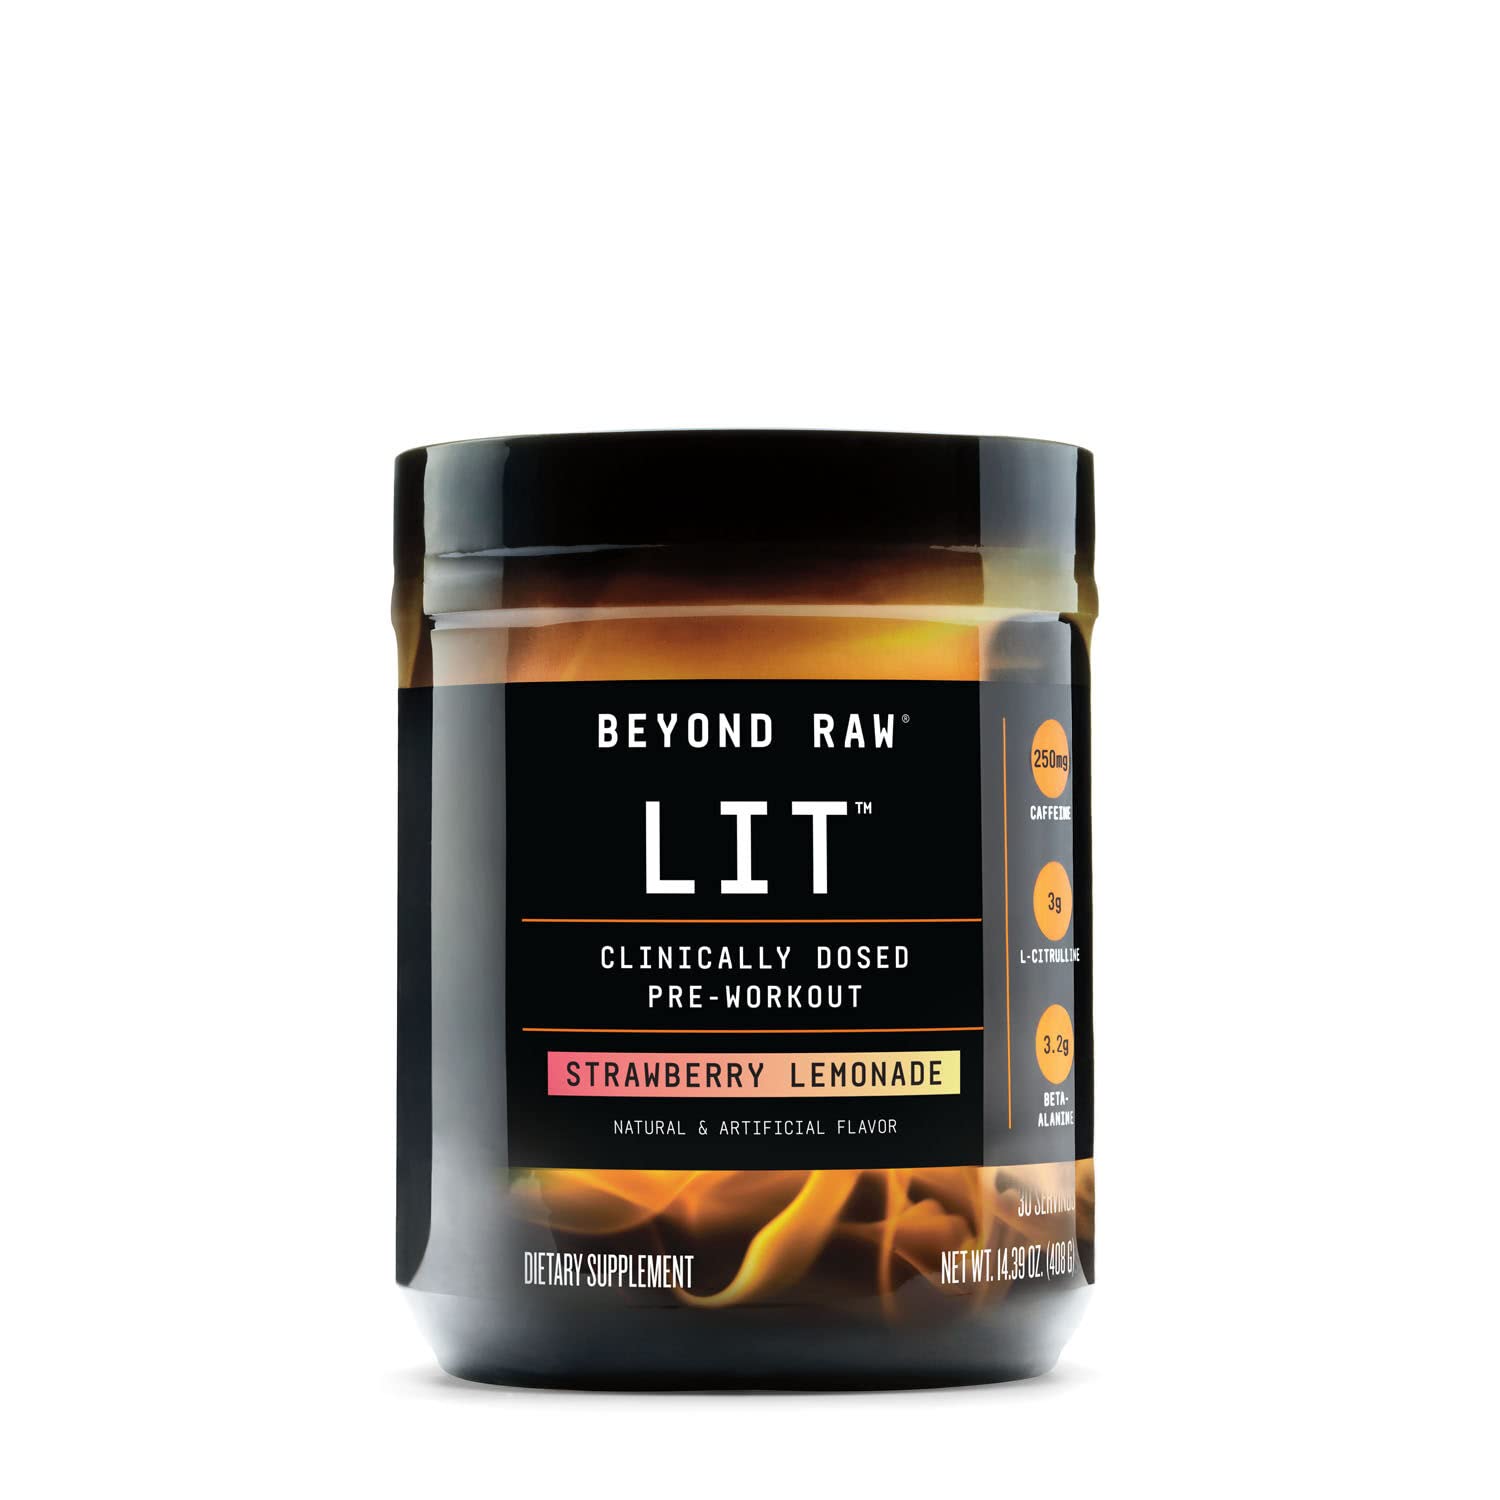 Book Cover Beyond Raw LIT | Clinically Dosed Pre-Workout Powder | Contains Caffeine, L-Citruline, and Beta-Alanine, Nitrix Oxide and Preworkout Supplement | Strawberry Lemonade | 30 Servings Strawberry Lemonade 14.39 Ounce (Pack of 1)